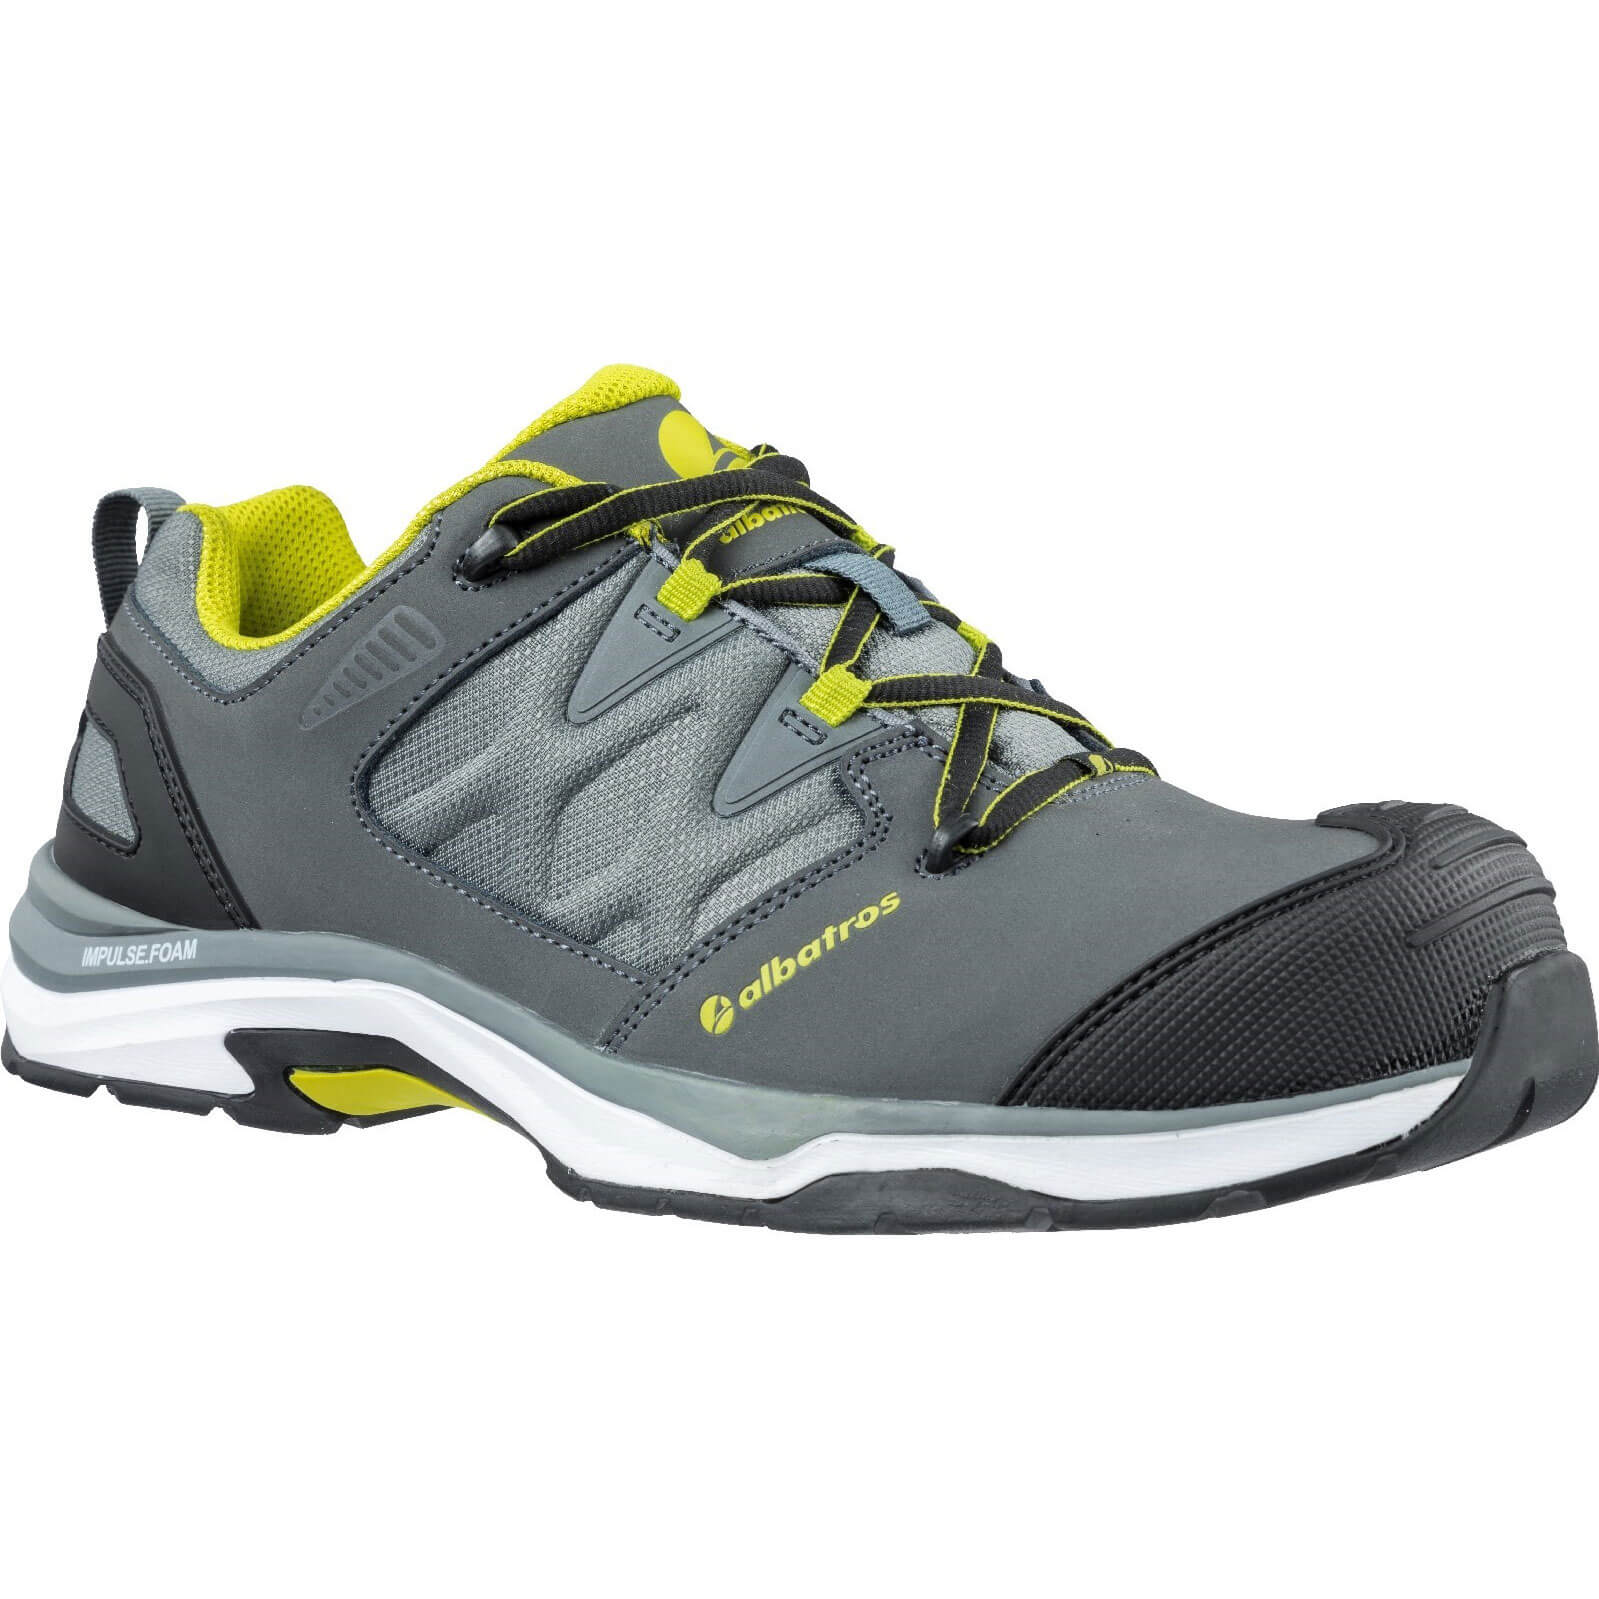 Image of Albatros Ultratrail Low Lace Up Safety Shoe Grey Size 7